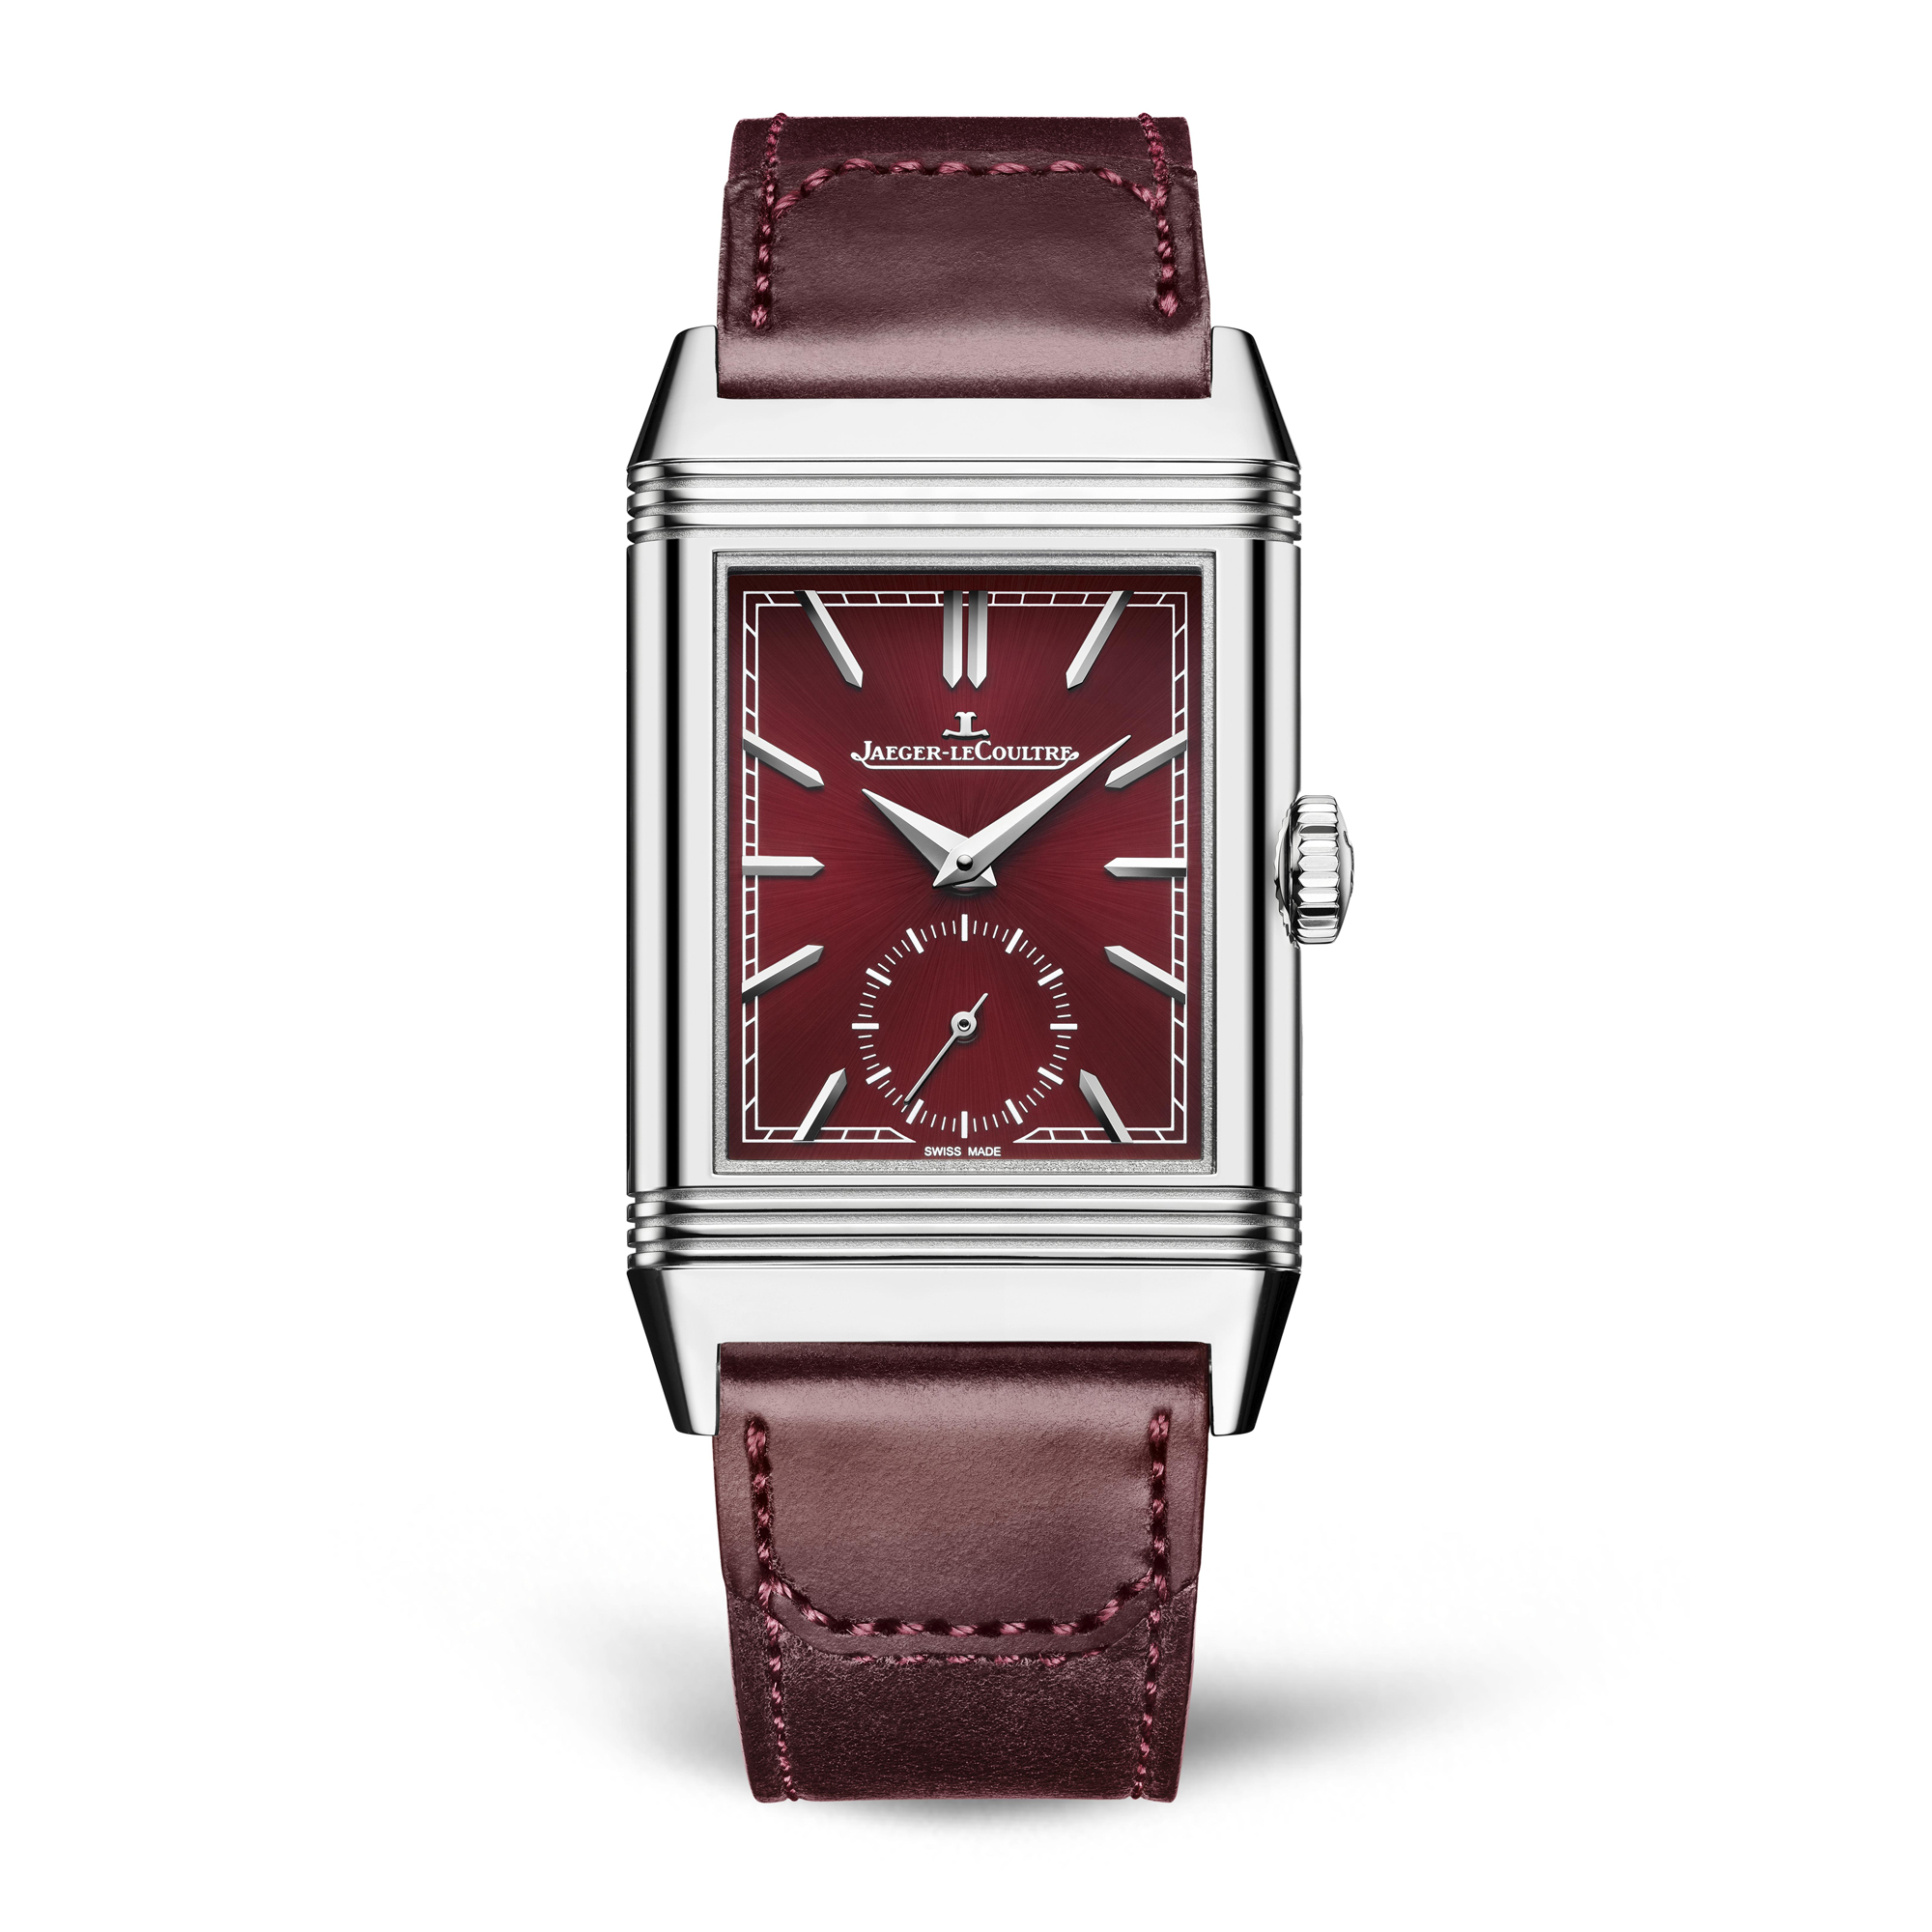 A favourite at the SIHH 2019, the new Reverso Tribute Small Seconds sits on a Casa Fagliano dark burgundy, red strap, matching the wine-coloured dial. The displays feature the signature Dauphine hands, hand-applied hour markers, and a small seconds at the 6 o'clock position. The new Reverso comes equipped with the in-house manual-winding Calibre 822/2 movement.